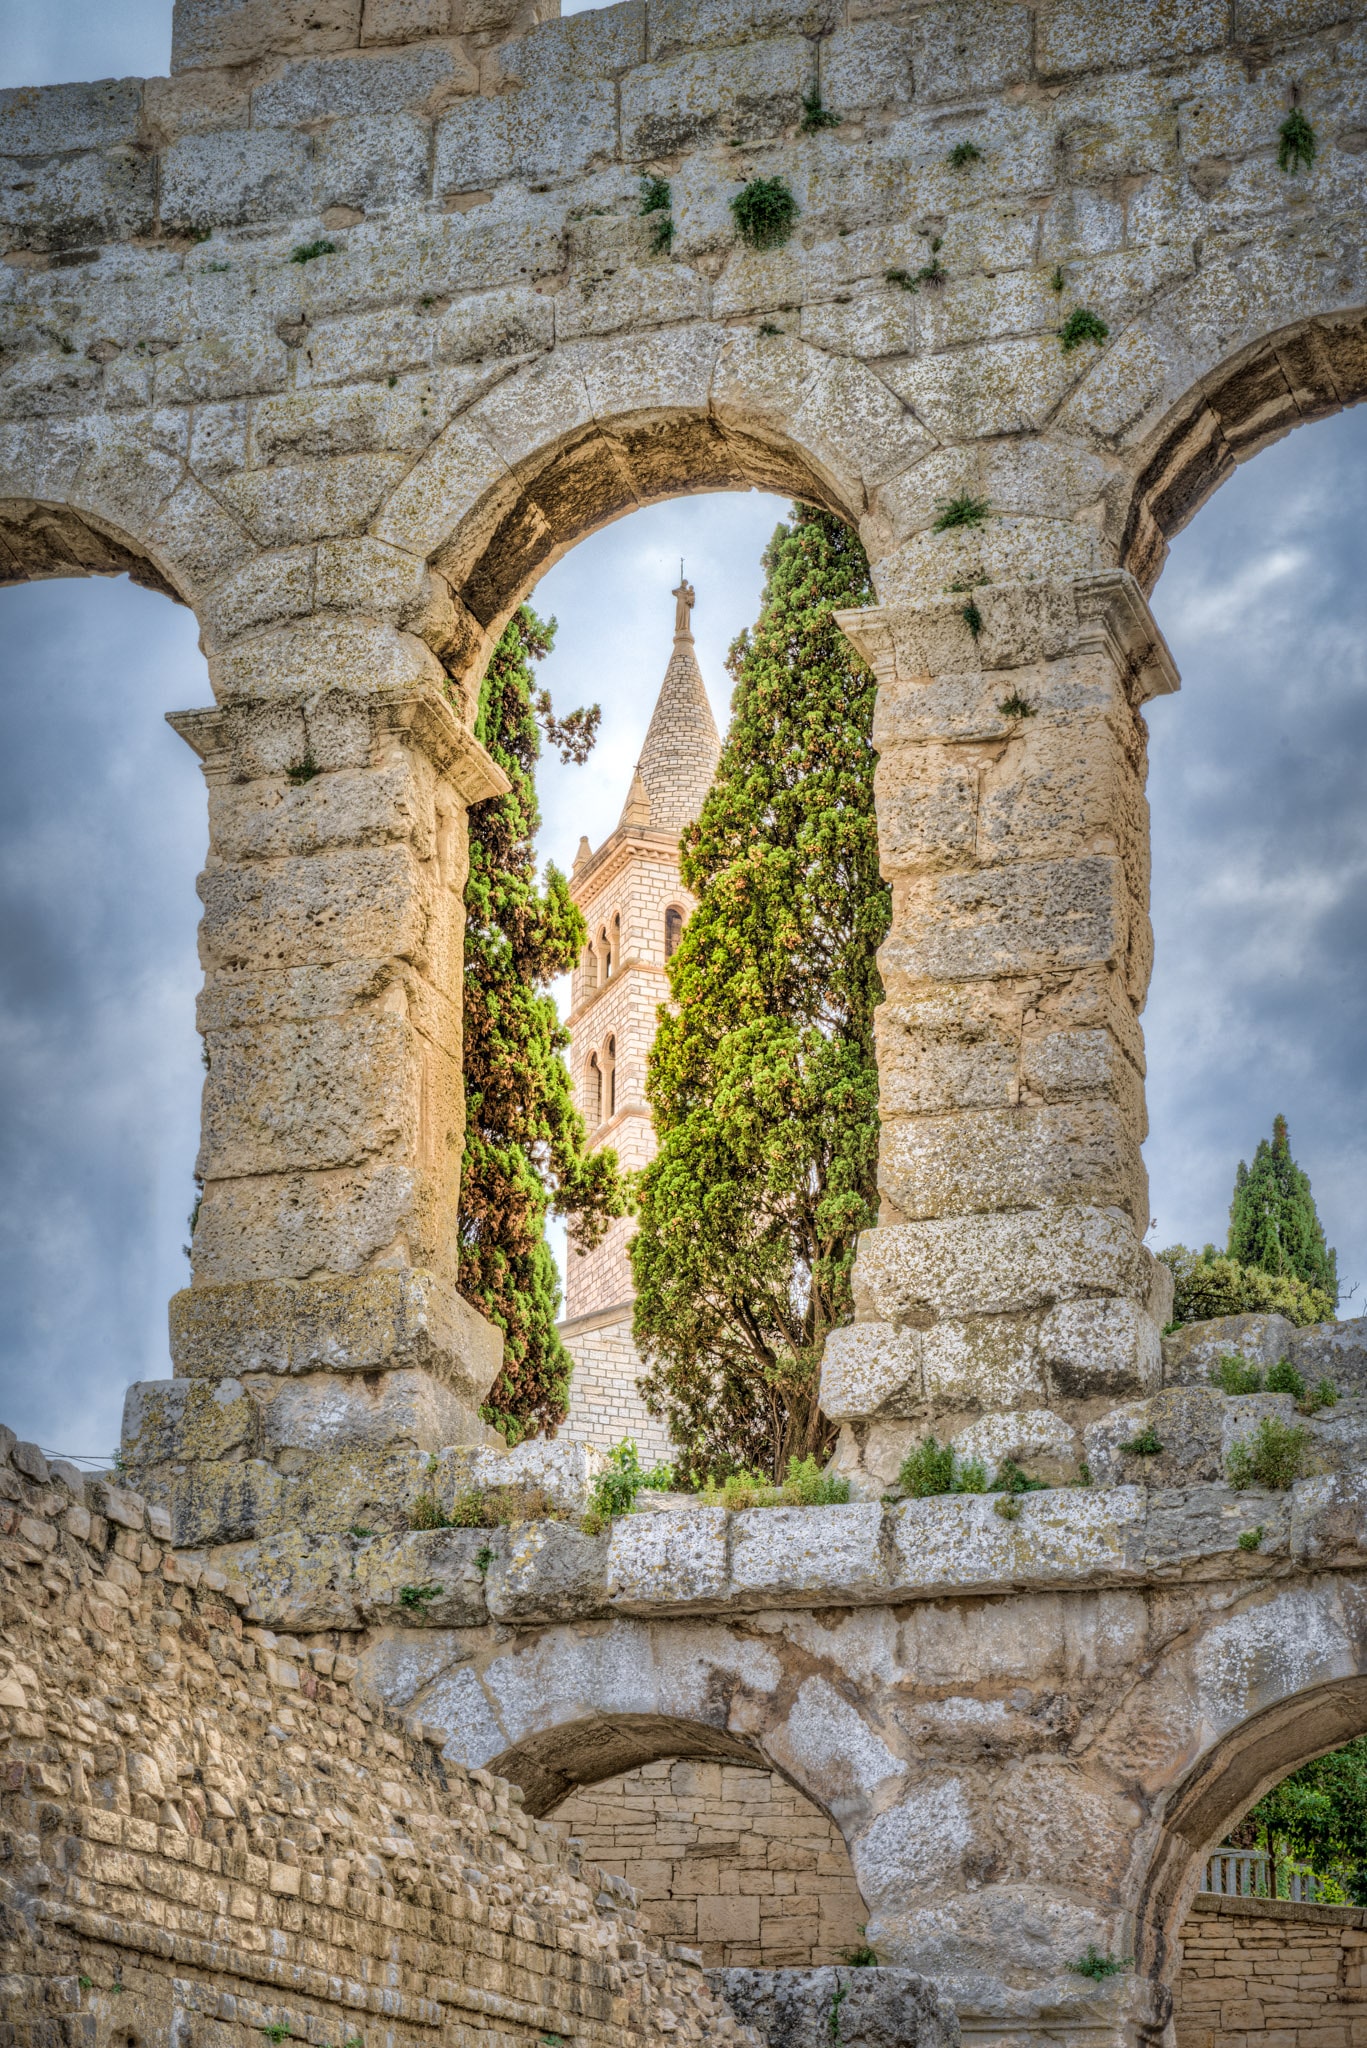 A view of the bell tower of the Church of St. Antun as seen through an upper arch in the wall of the Roman amphitheater in the Istrian city of Pula, Croatia.